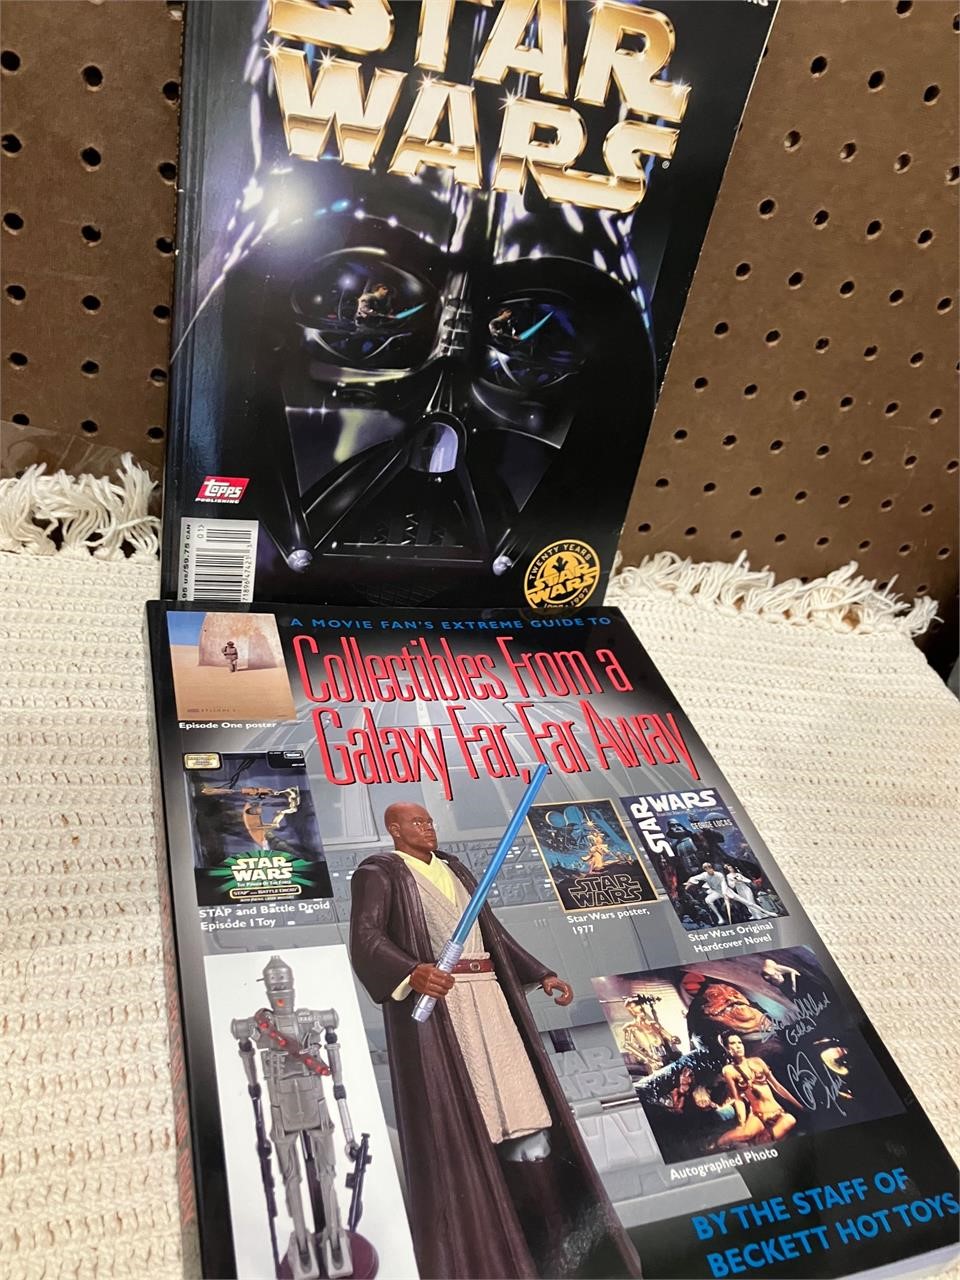 Book-Star War collectables from